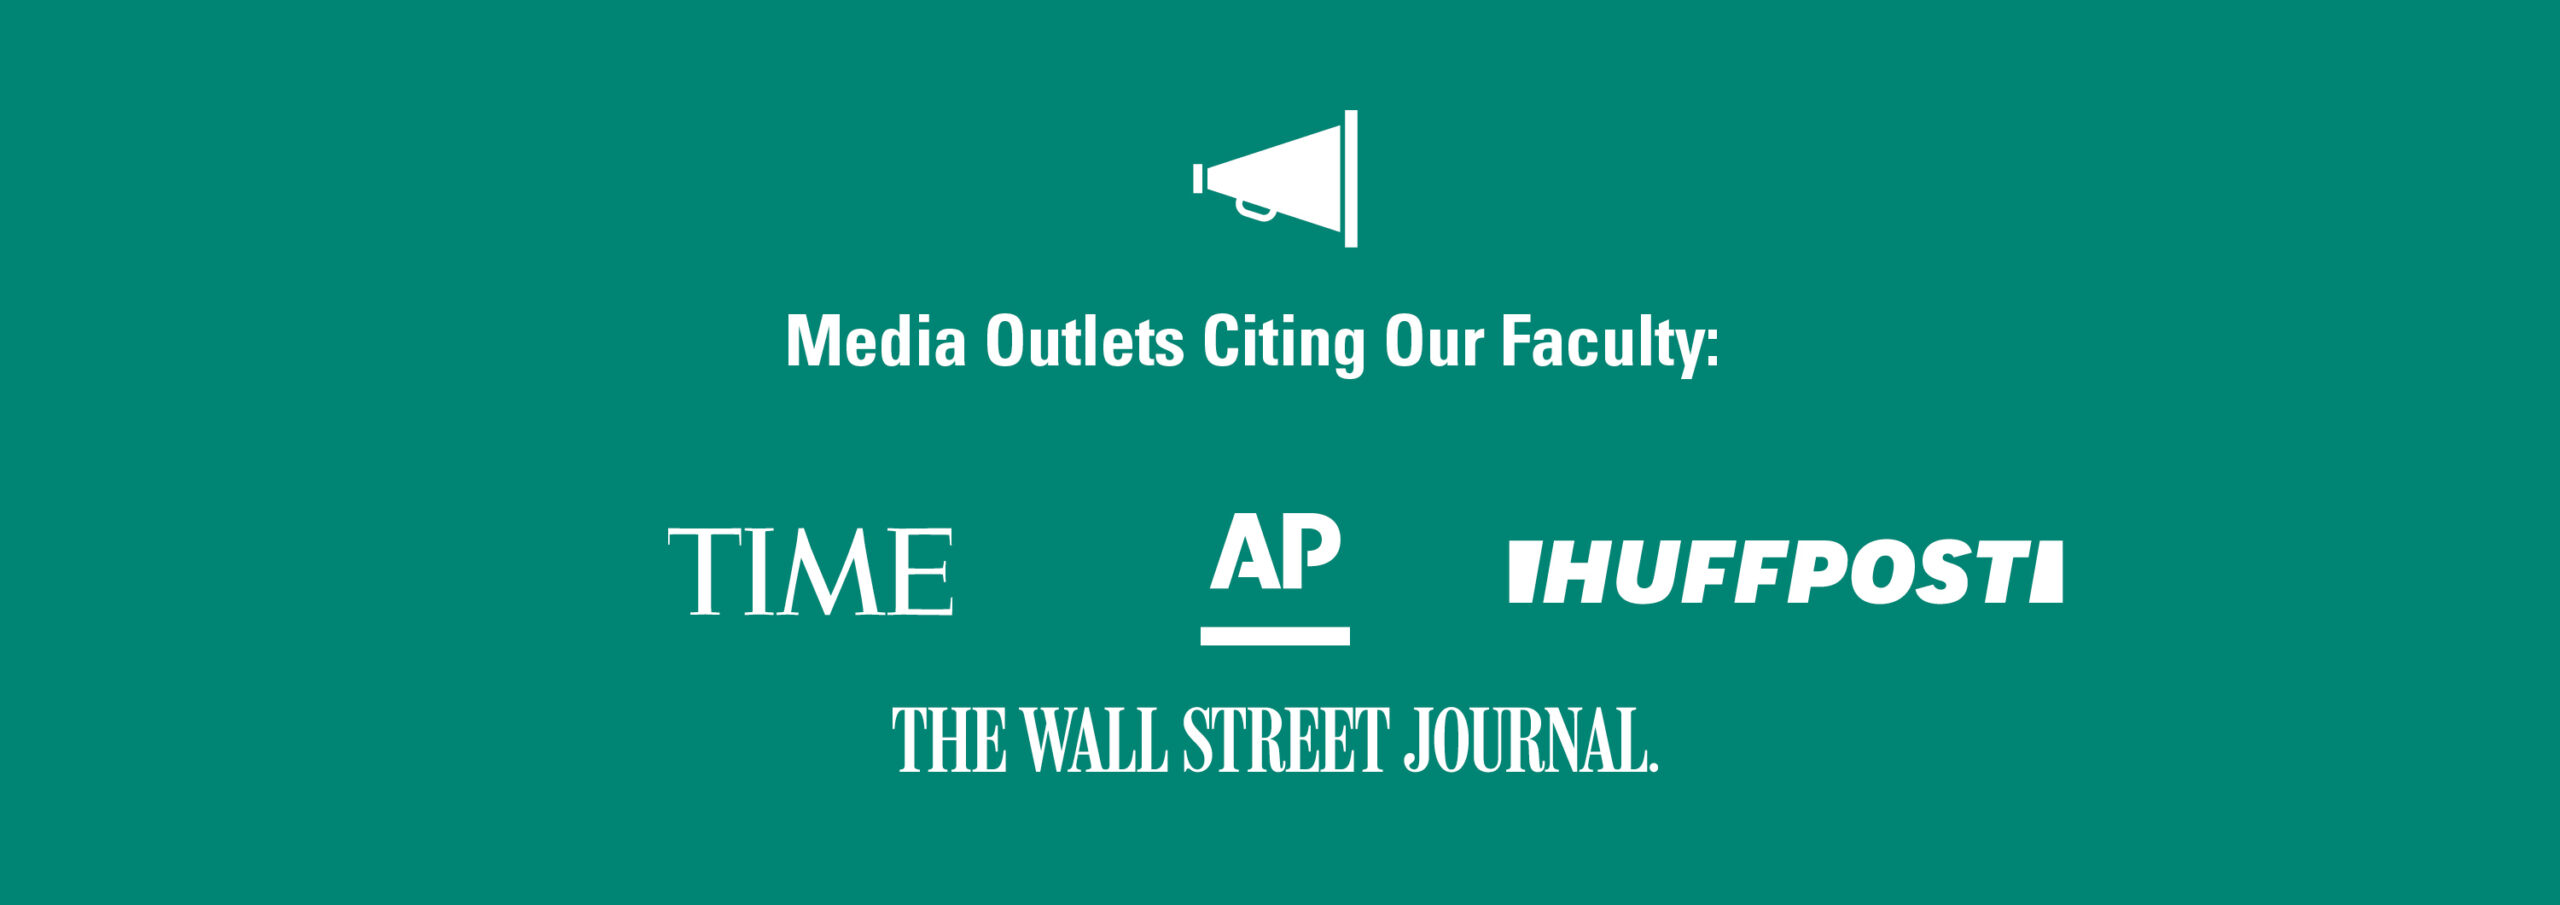 Media Outlets that have cited NC State College of Education faculty members during the 2020-21 academic year